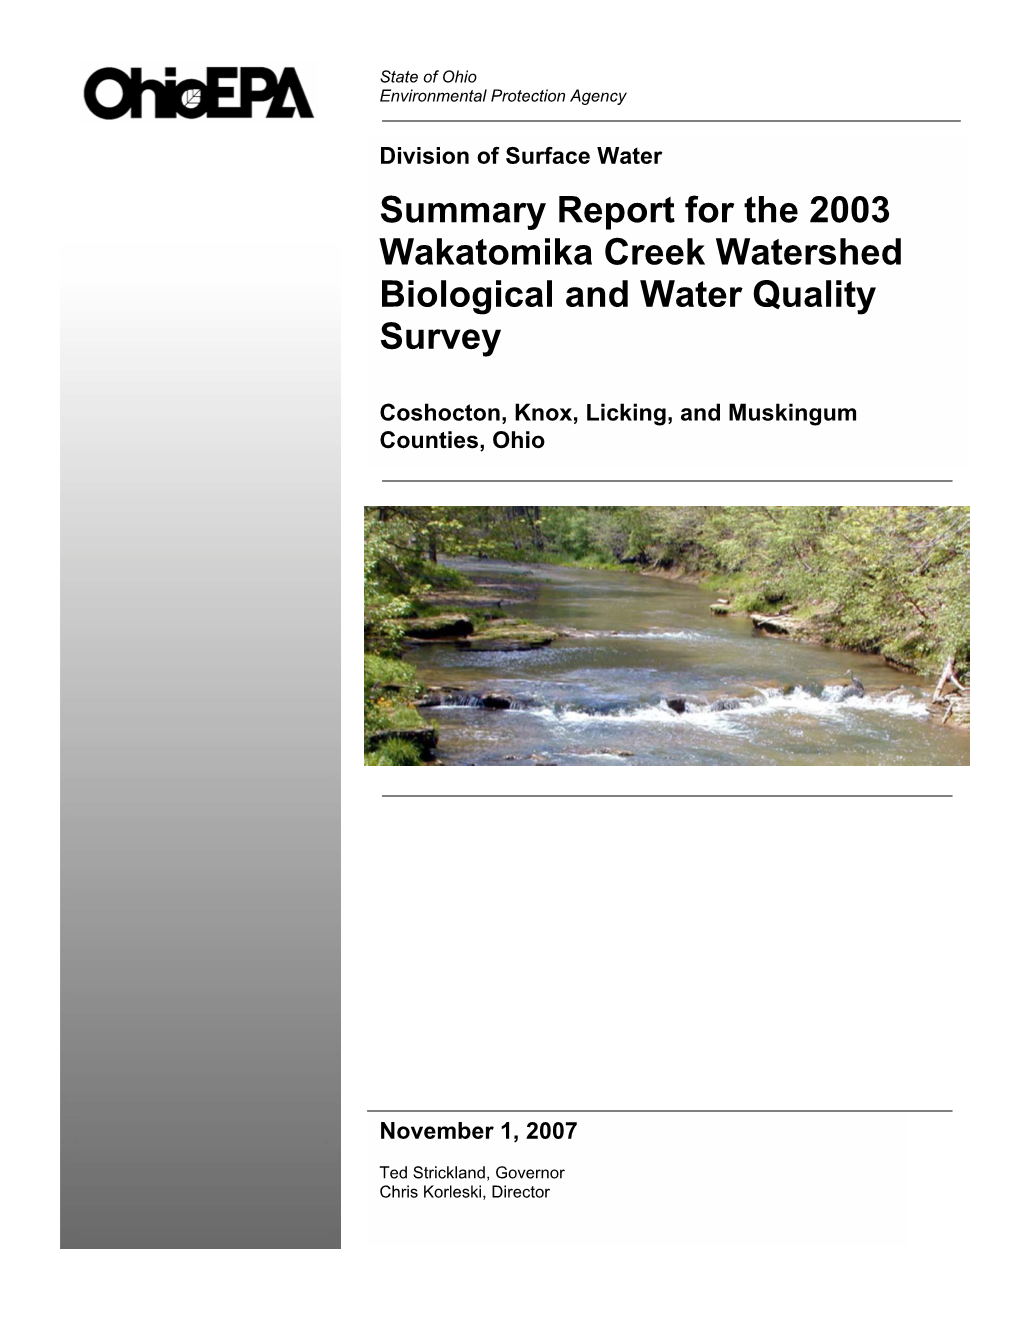 Summary Report for the 2003 Wakatomika Creek Watershed Biological and Water Quality Survey